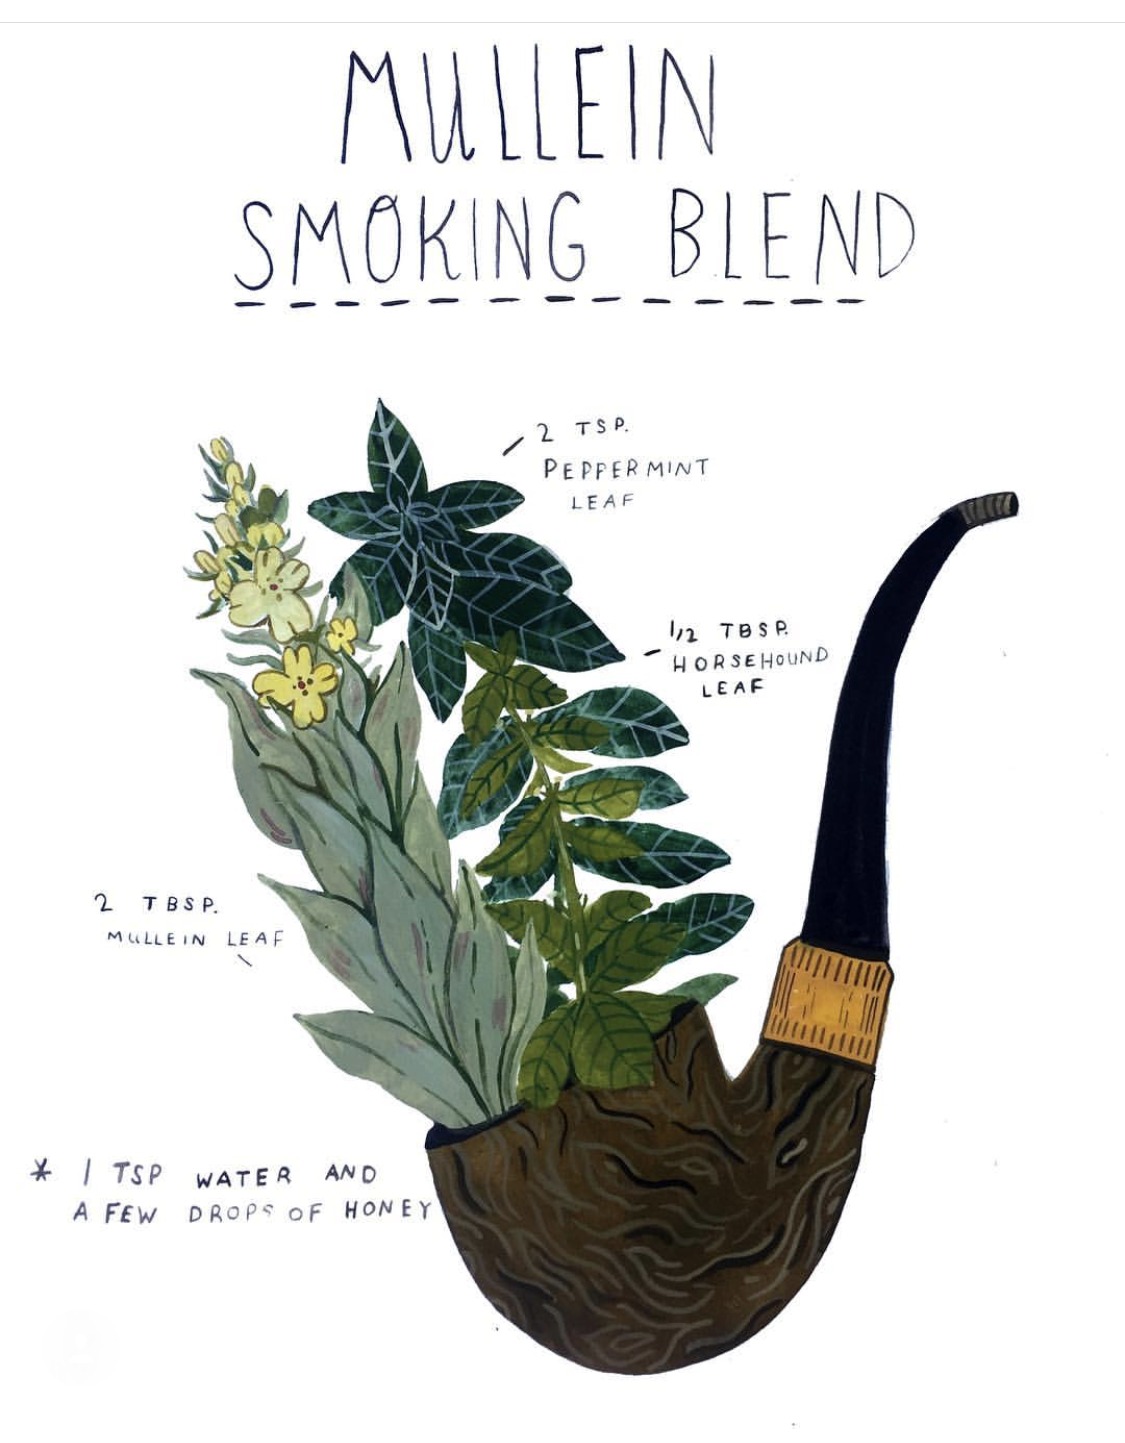 How To Craft Your Own Herbal Smoking Blends | Herbal Academy | Learn how to create your own herbal smoking blends that are enjoyable and can benefit your health at times.